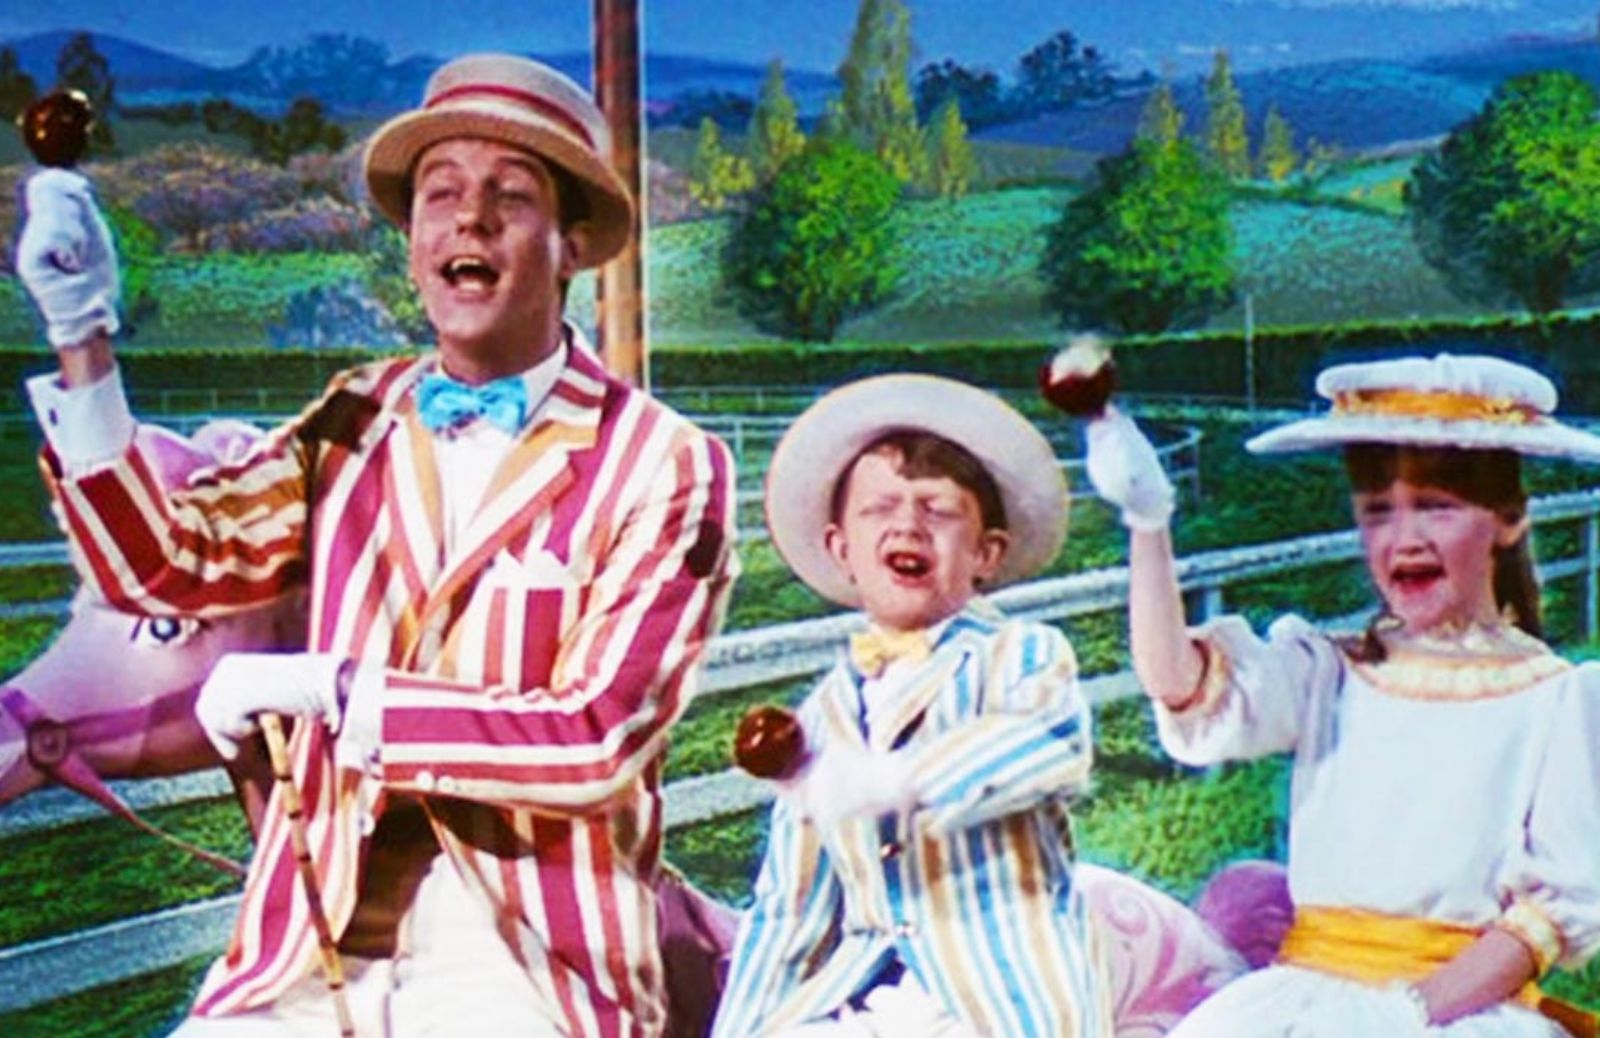 Ricette Disney: le mele caramellate di Mary Poppins